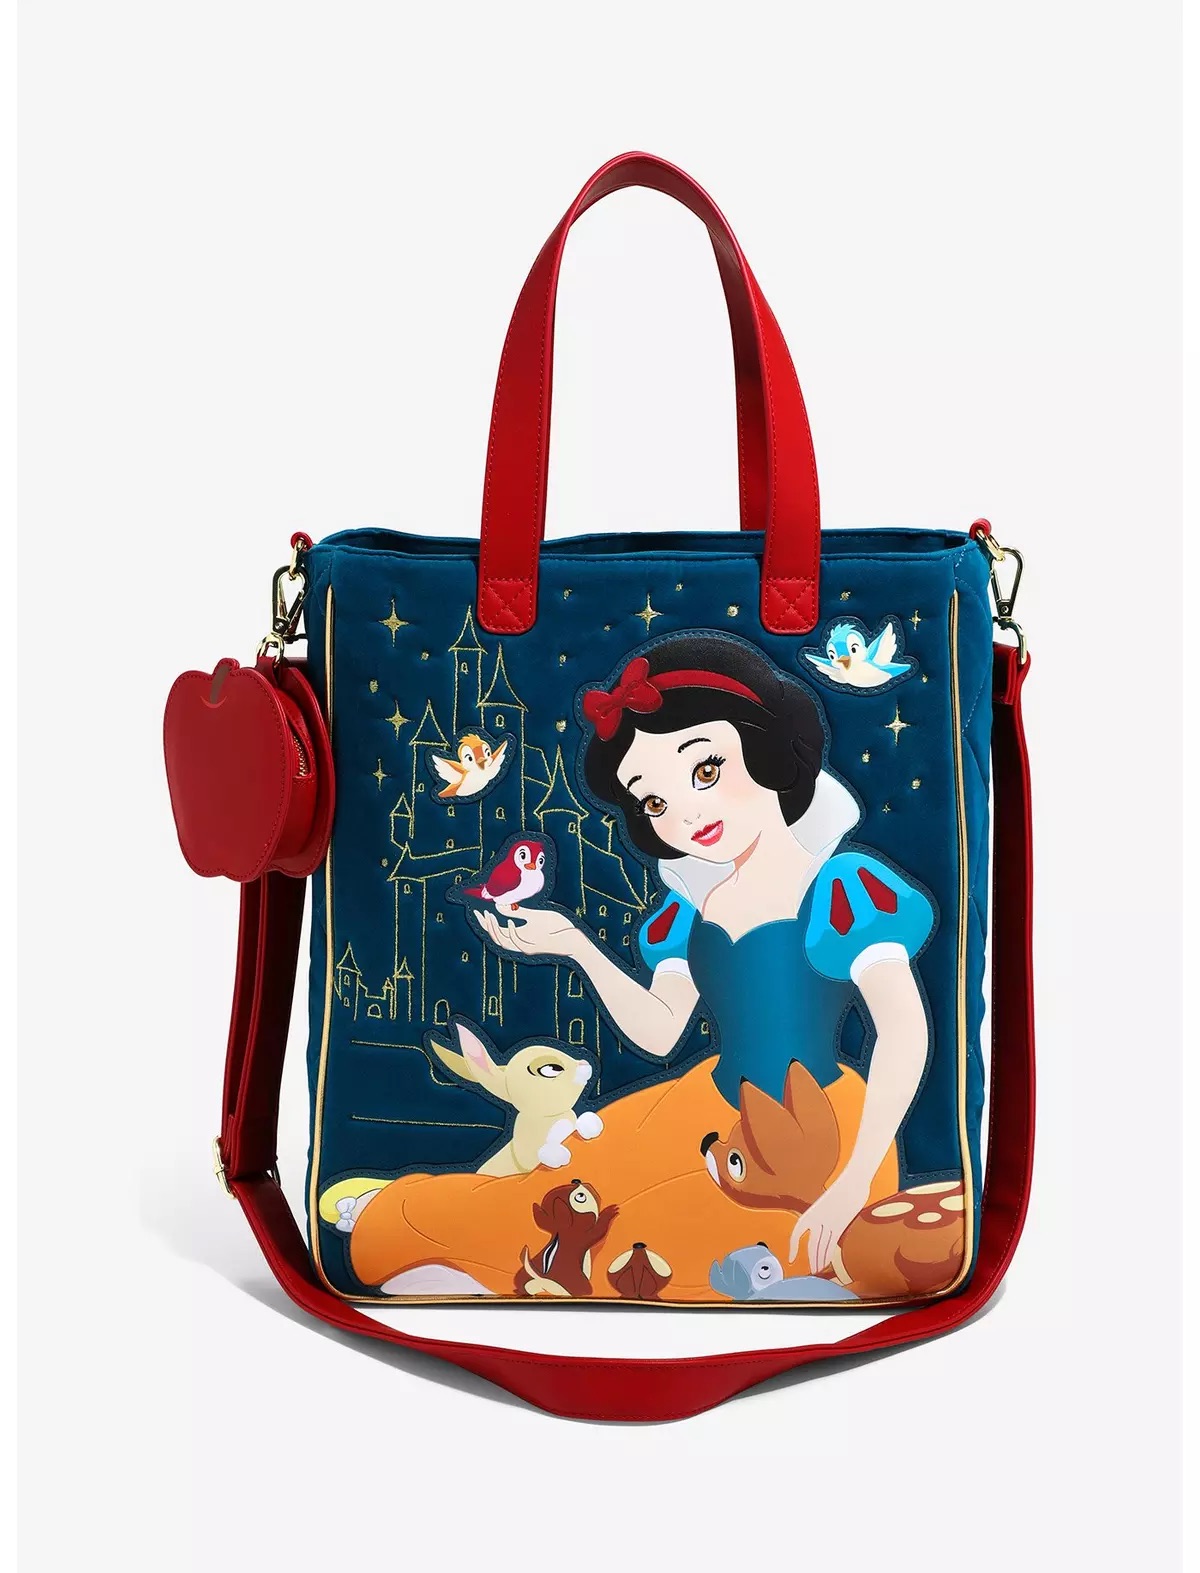 HURRY! 8 NEW Disney Loungefly Bags Are Online NOW! | the disney food blog